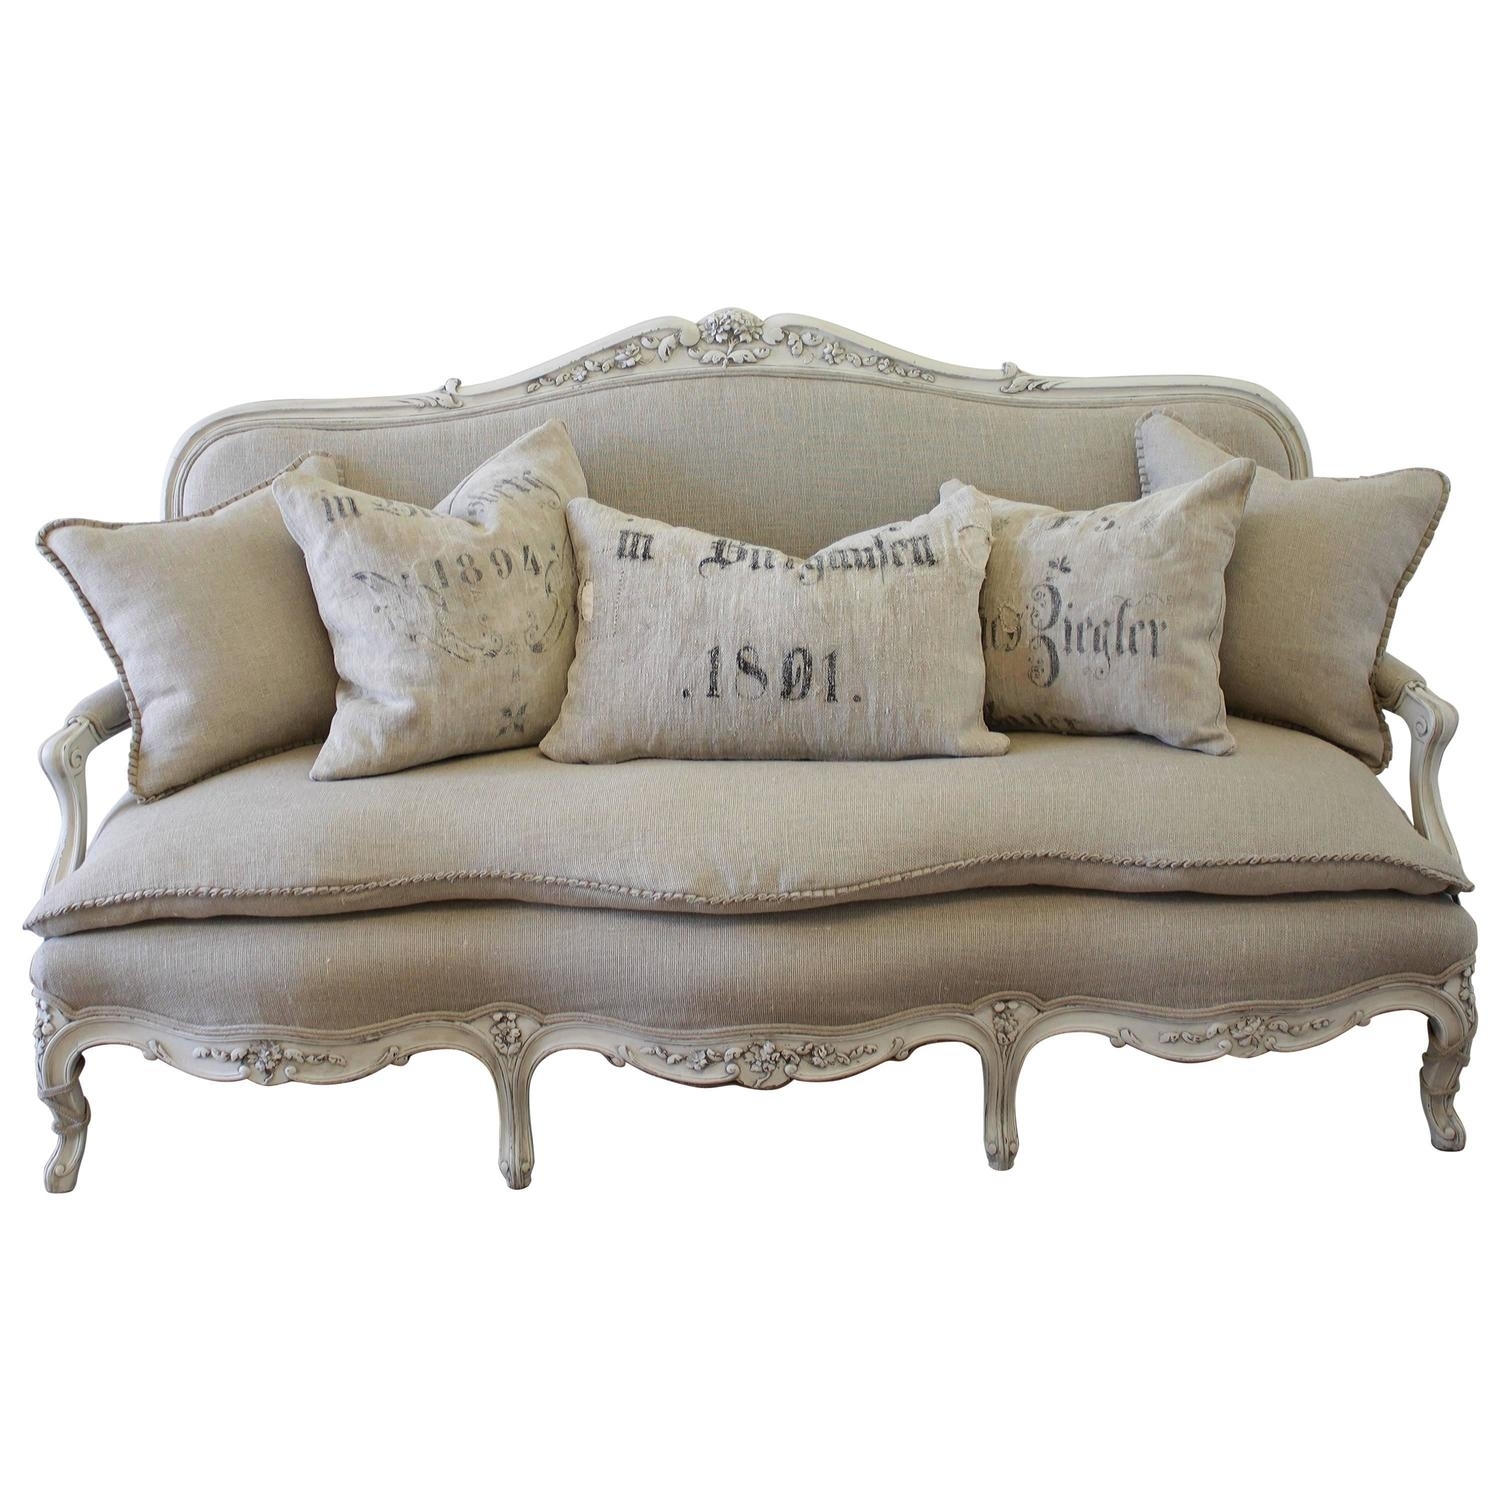 French Country Sofa 